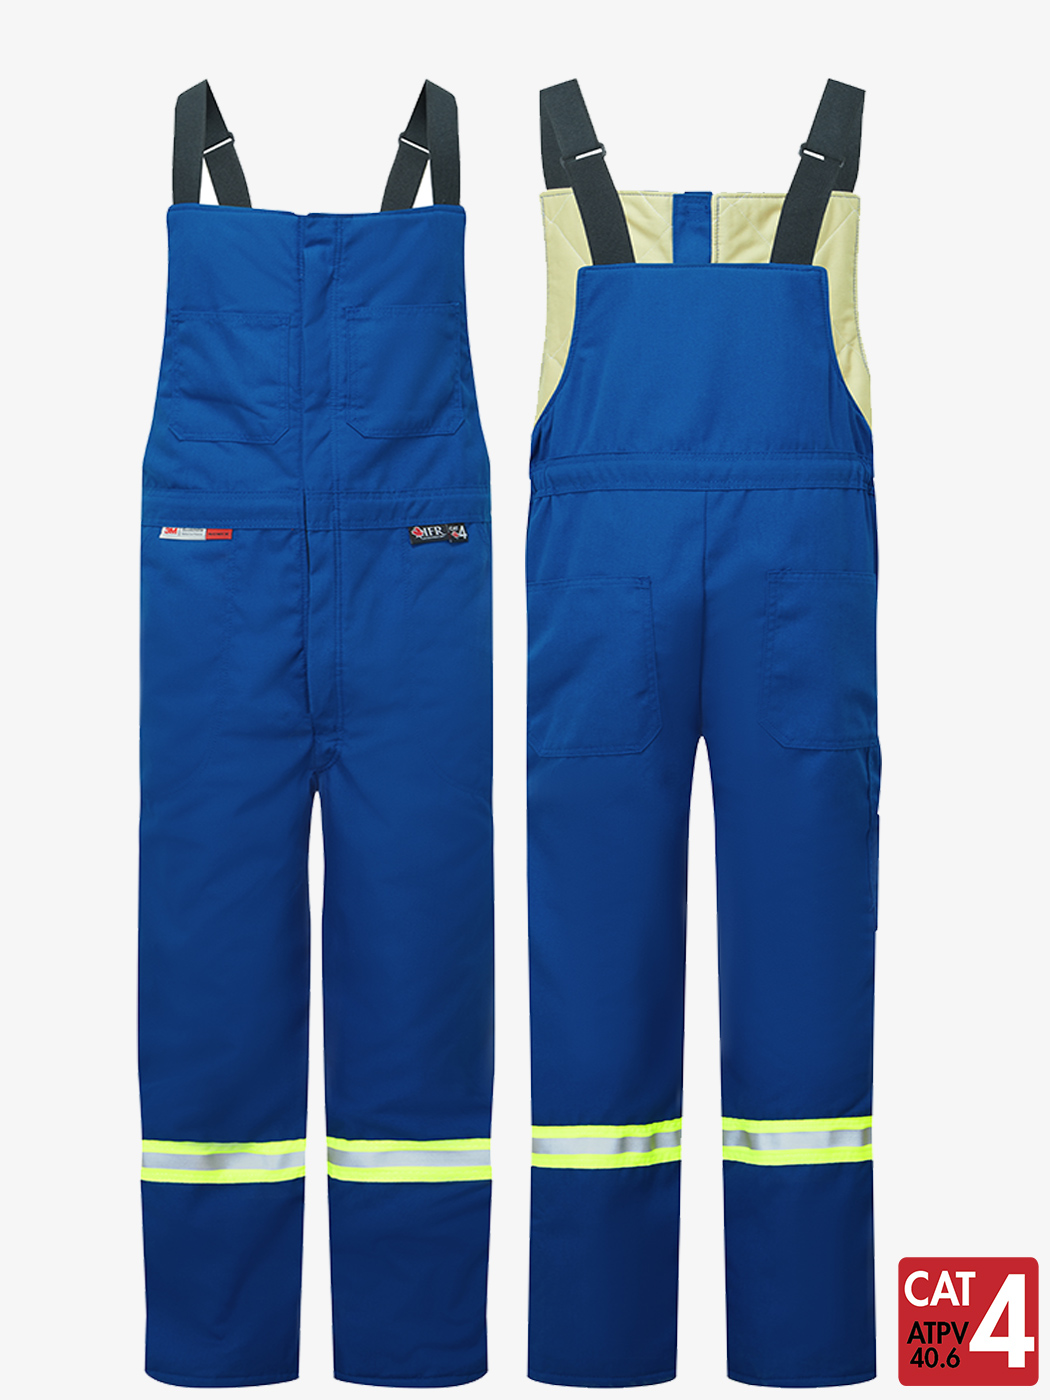 Nomex®Essential 6 oz Insulated Bib Pants – Style 225